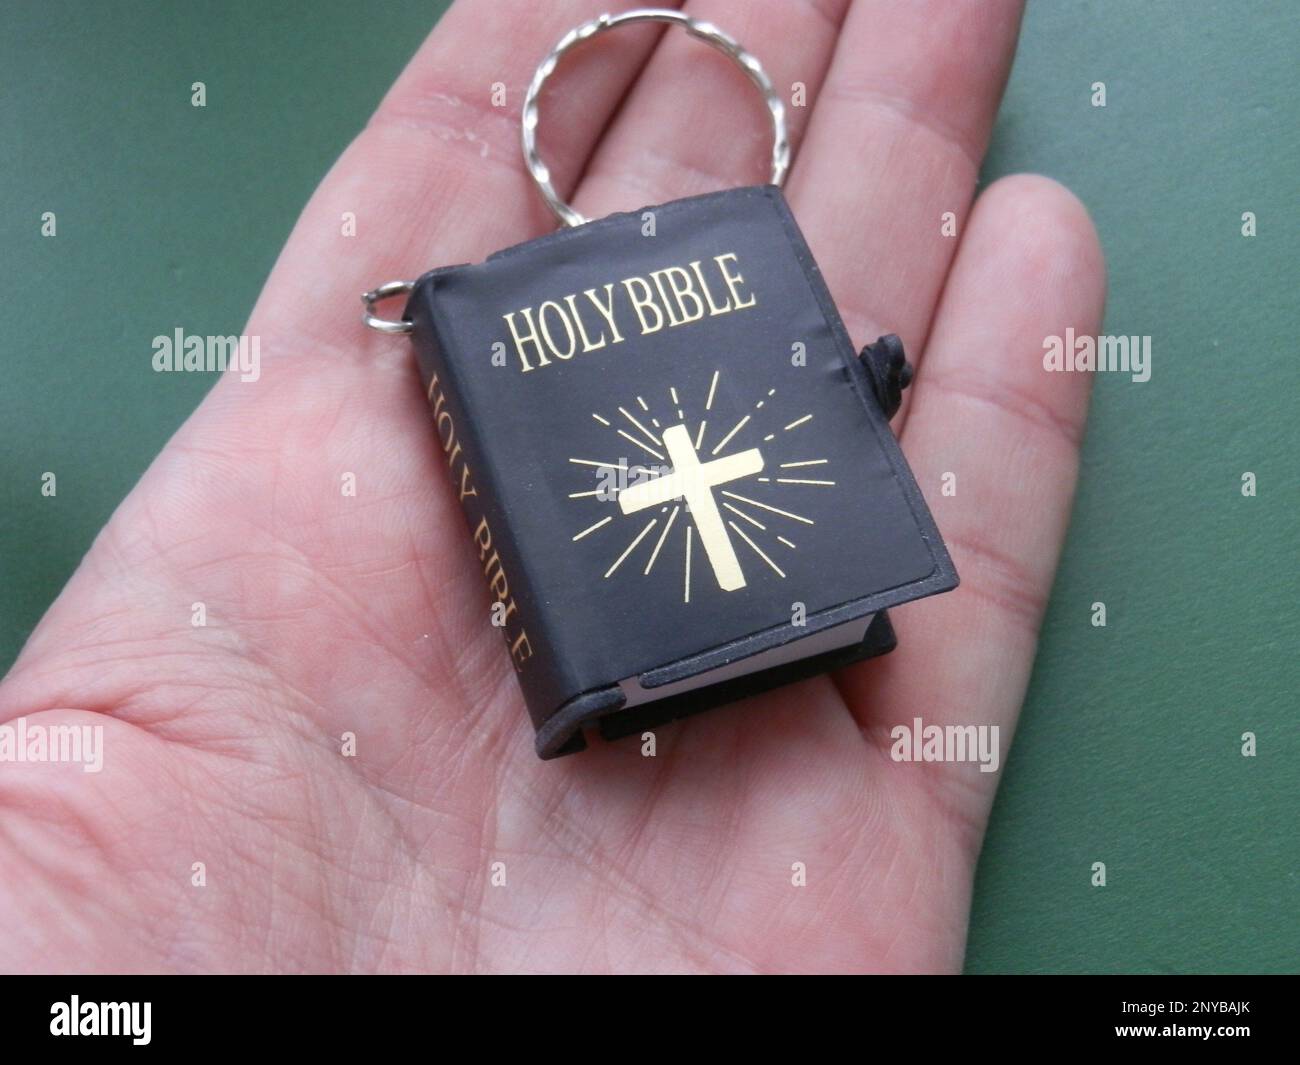 Religious metal symbol medallion in the hand. Stock Photo